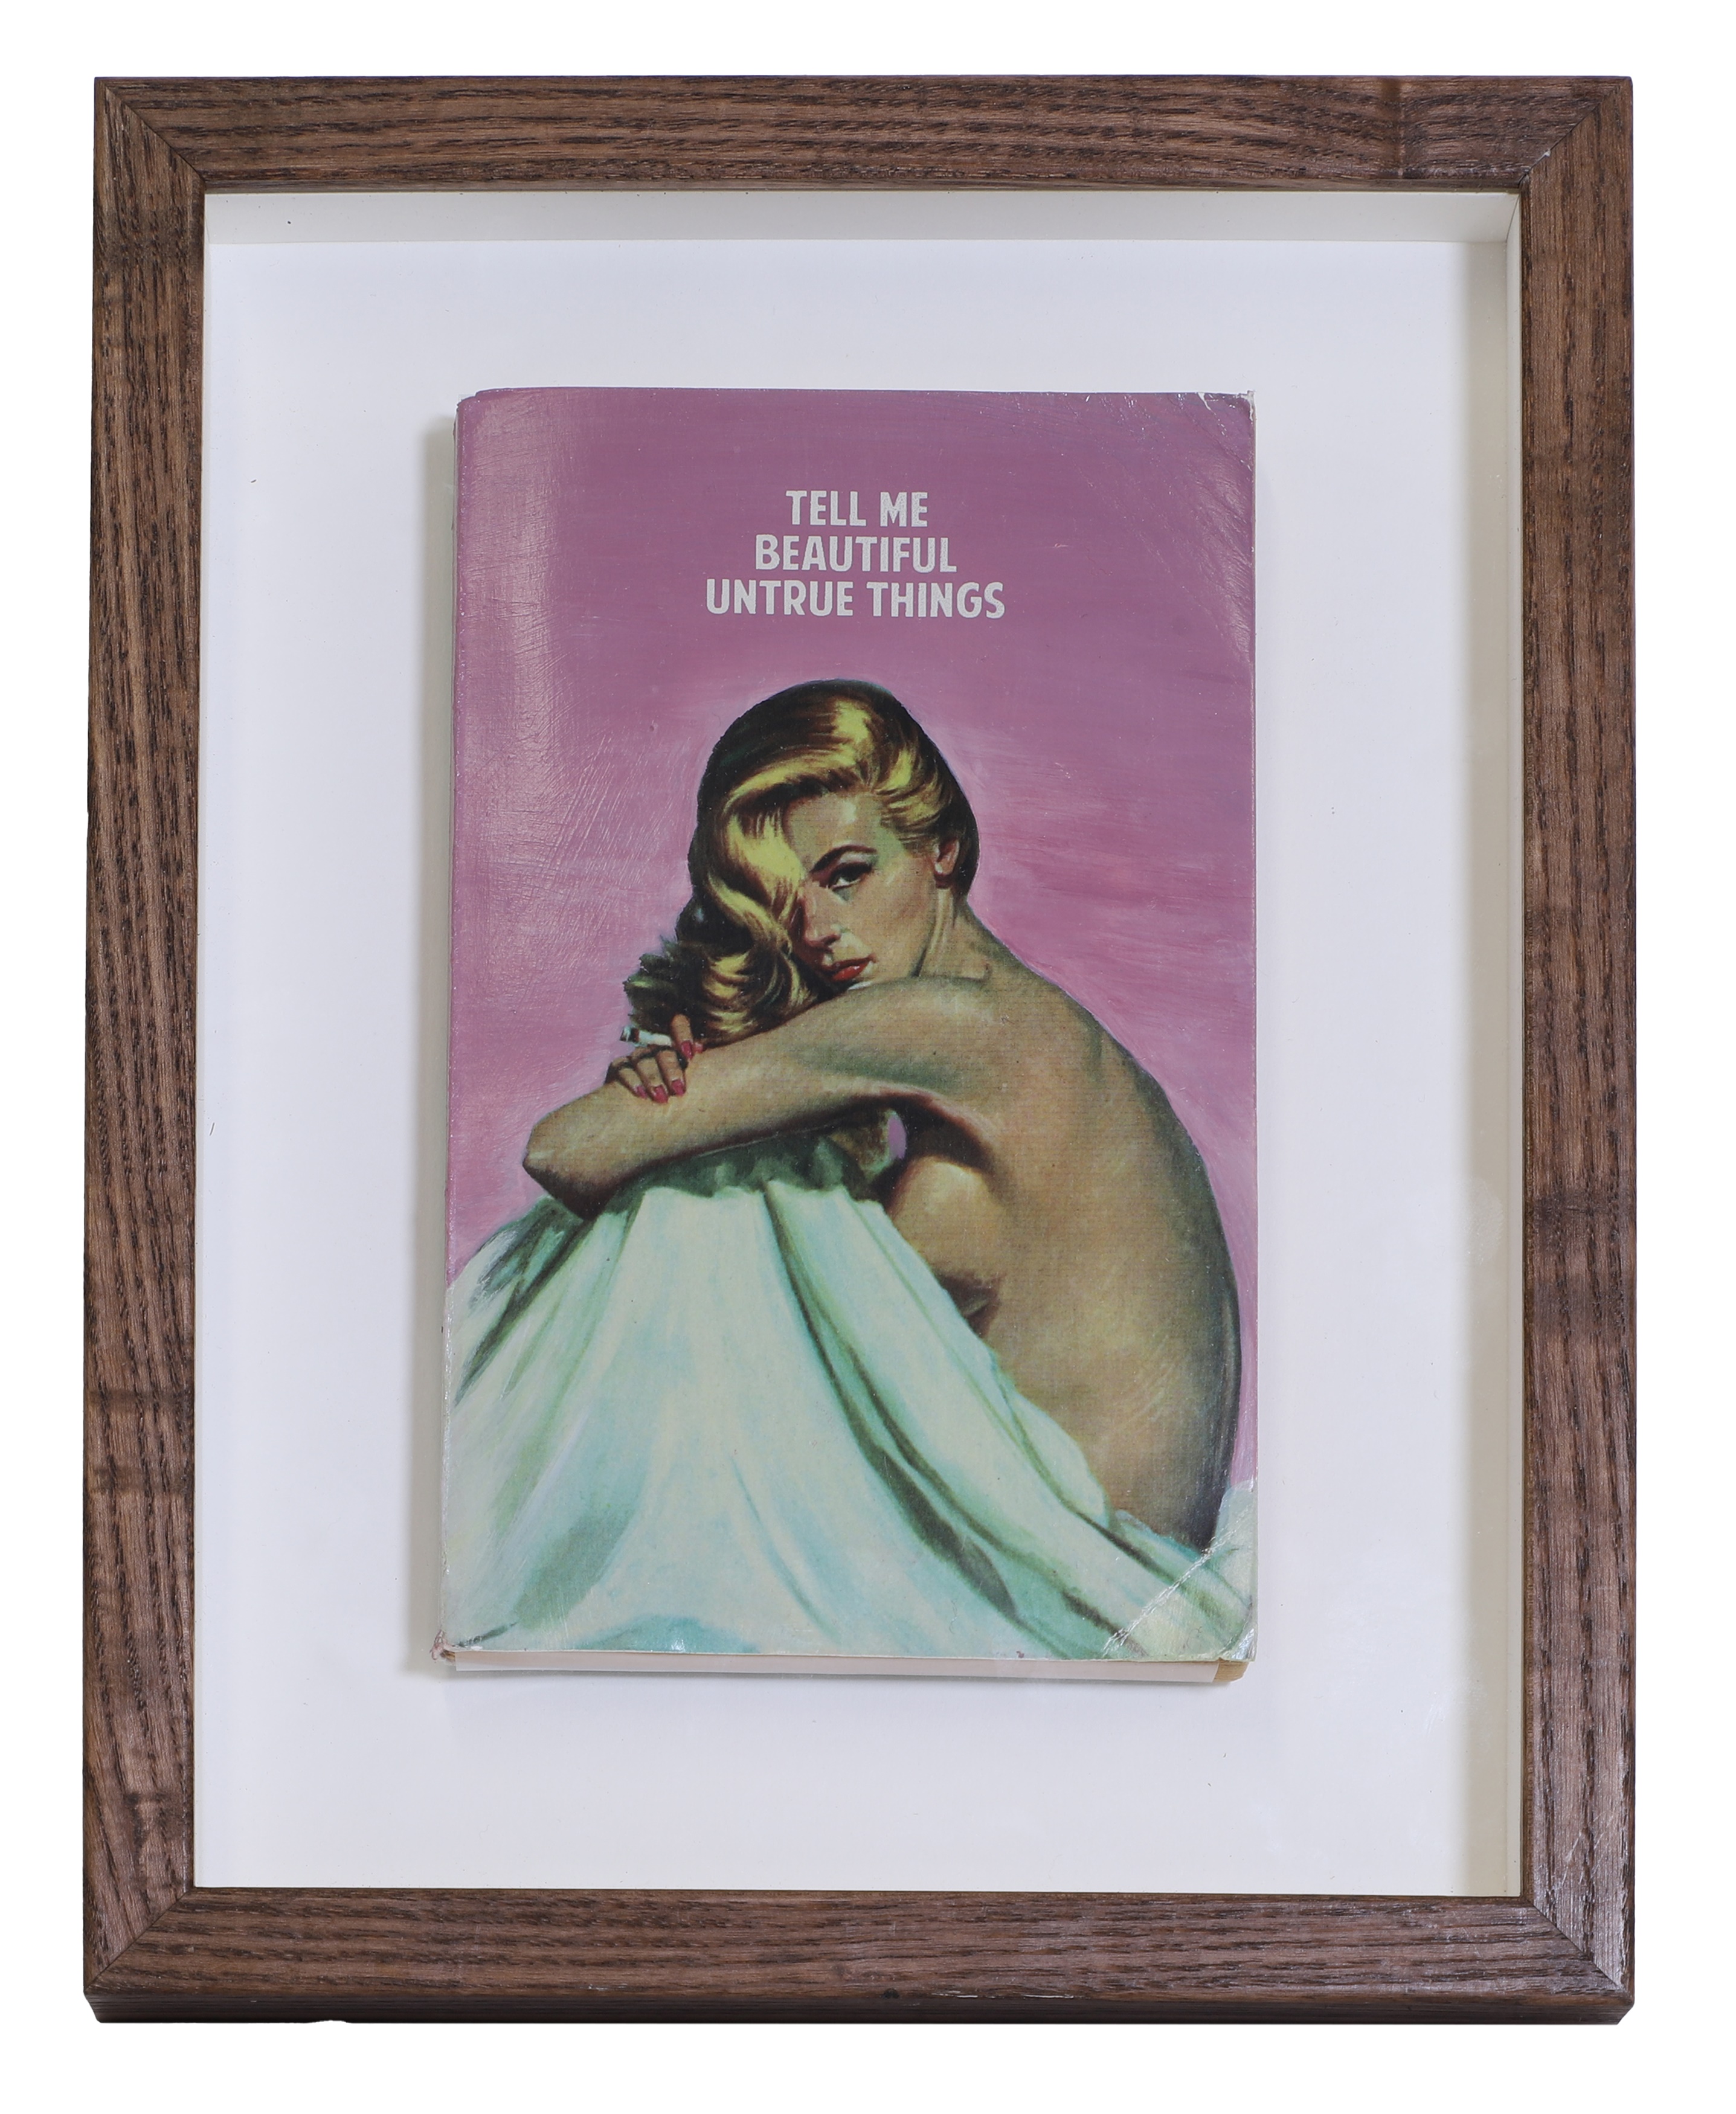 The Connor Brothers (b.1968) 'Tell Me Beautiful Untrue Things', 2019 hand painted vintage paperback with silkscreen, signed and numbered 1/2 on a label verso 17.5 x 10.5cm (£800-1,200)